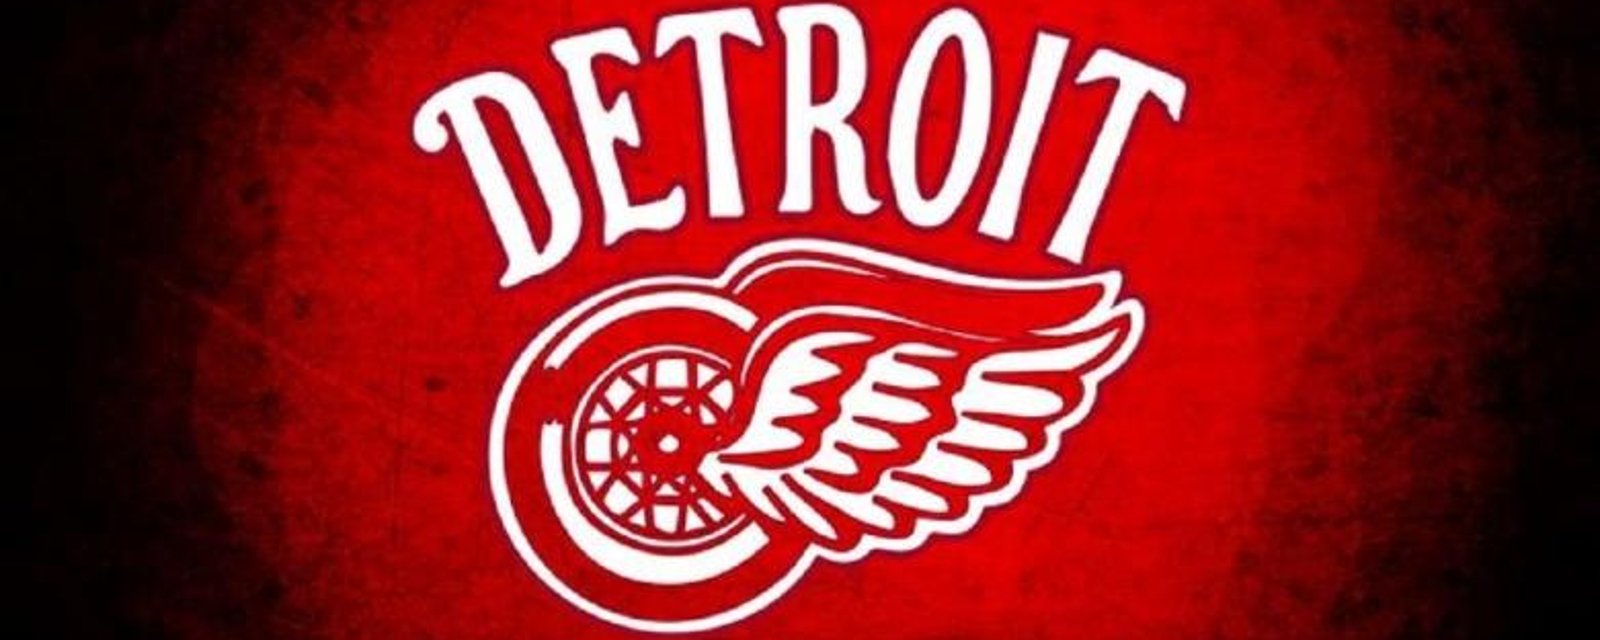 Detroit will decide their fate today